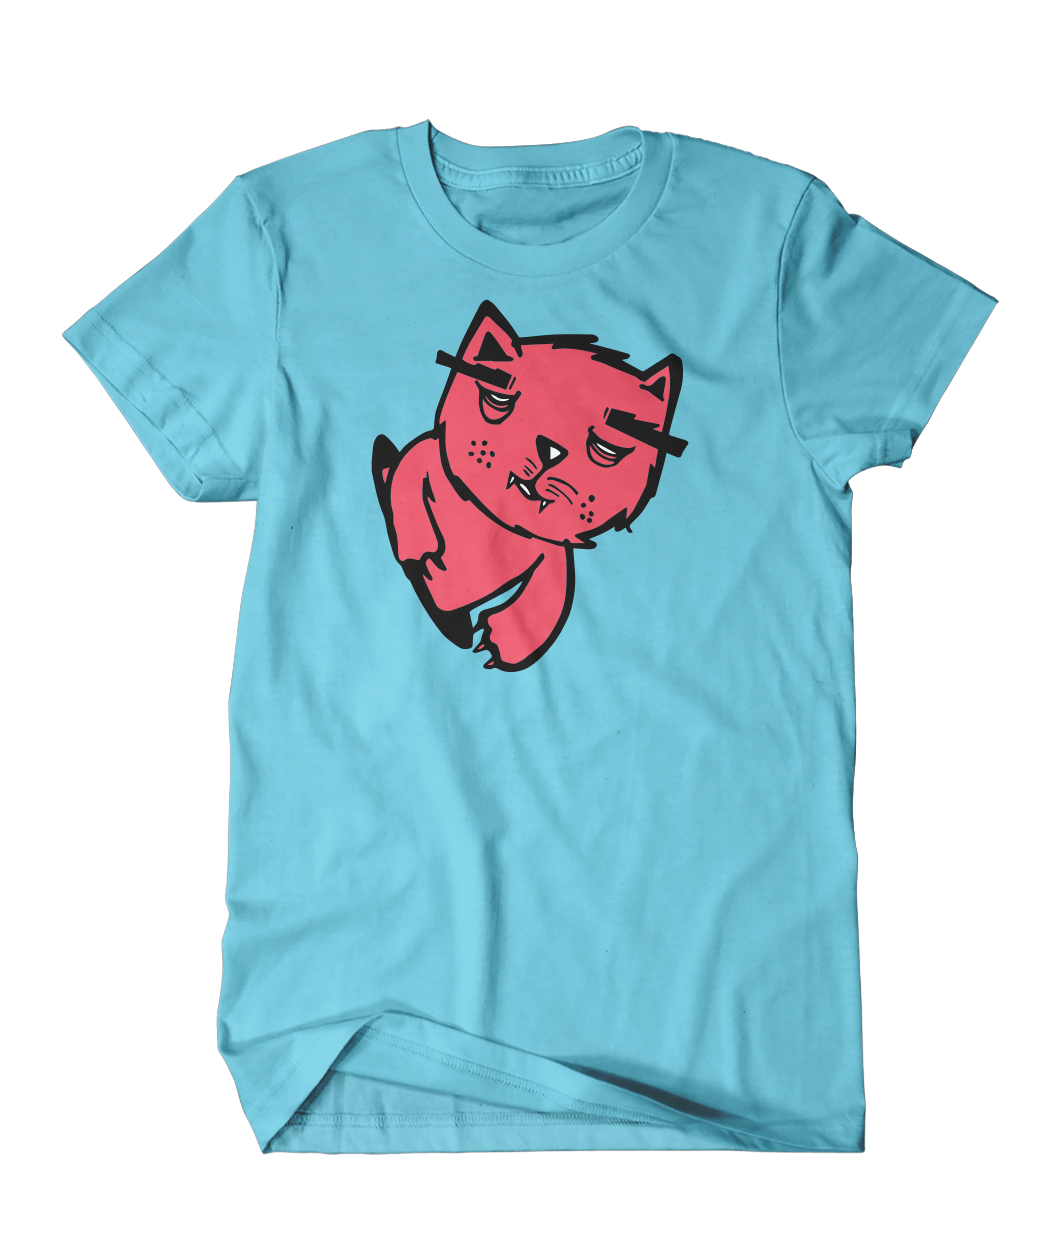 Blue shirt featuring a cartoon illustration of a red Kedicizdim cat. The cat's upper half emerges from a hole.